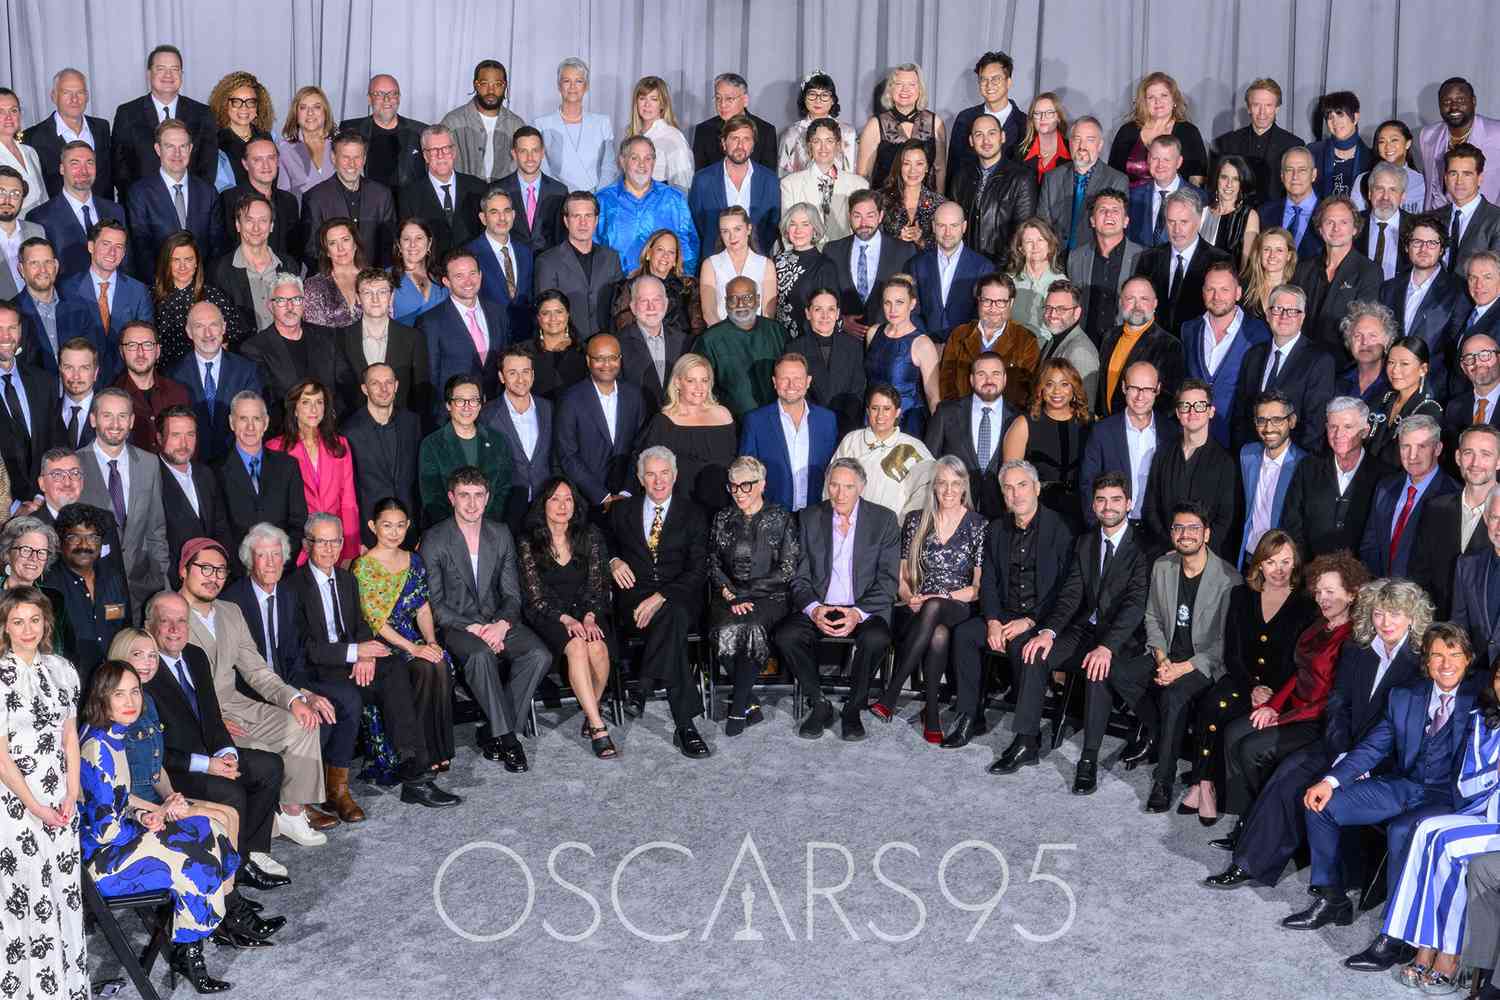 See the 2023 Oscar nominees strike a pose for their class photo